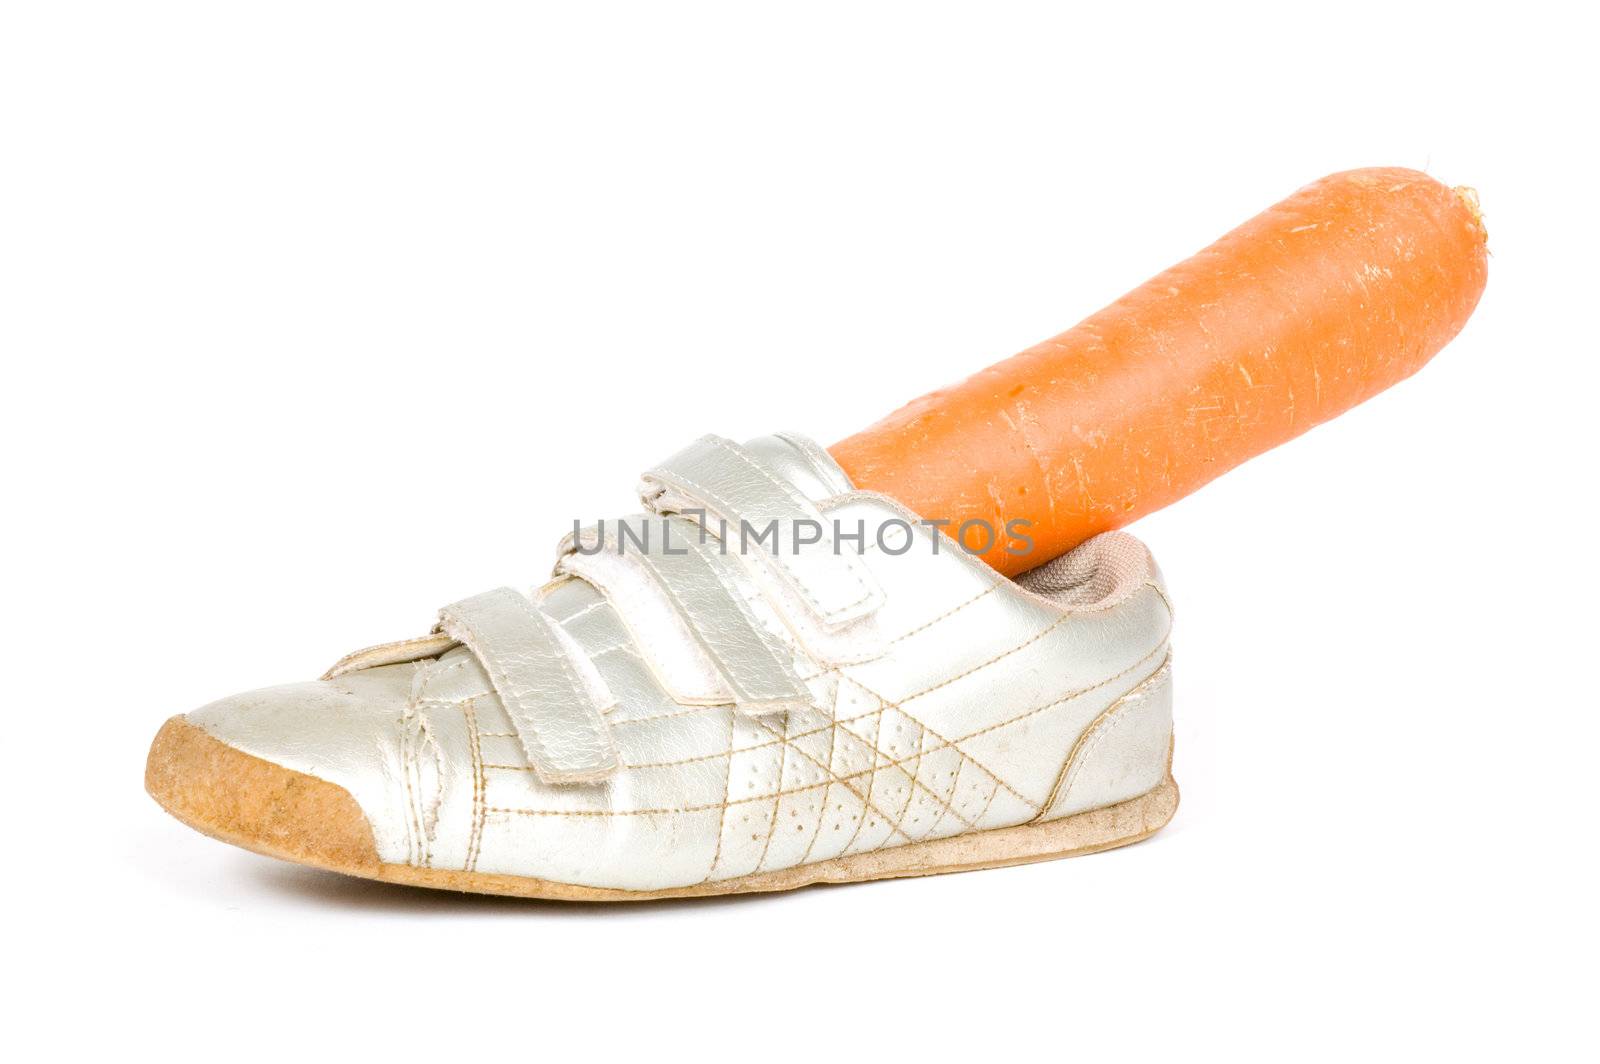 Shoe with carrot for the horse from Sinterklaas by ladyminnie